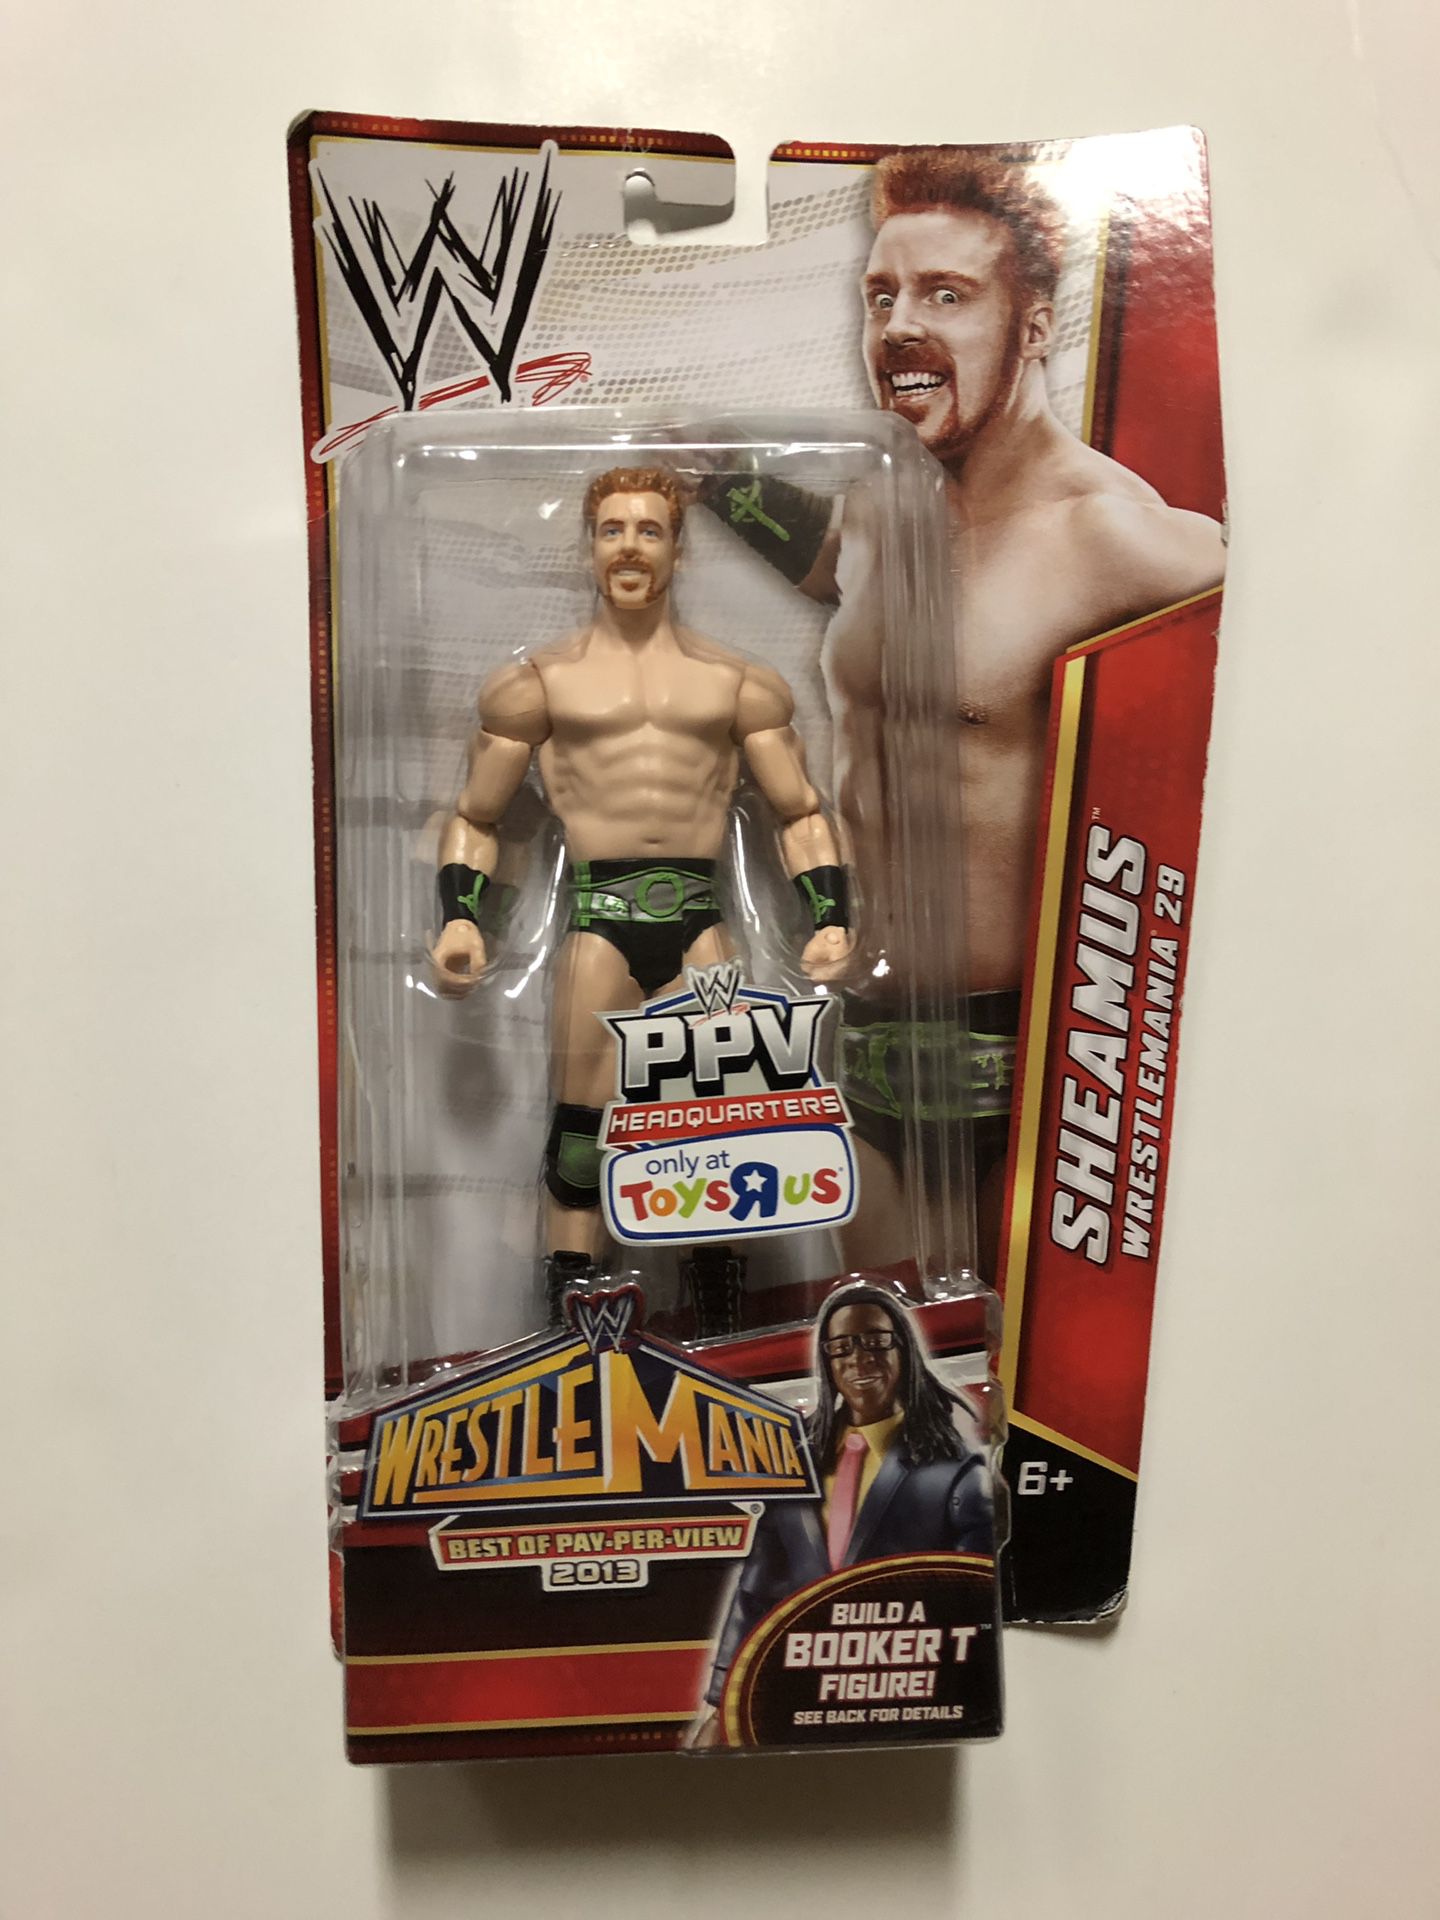 WWE TOYS R US EXCLUSIVE Sheamus Action Figure